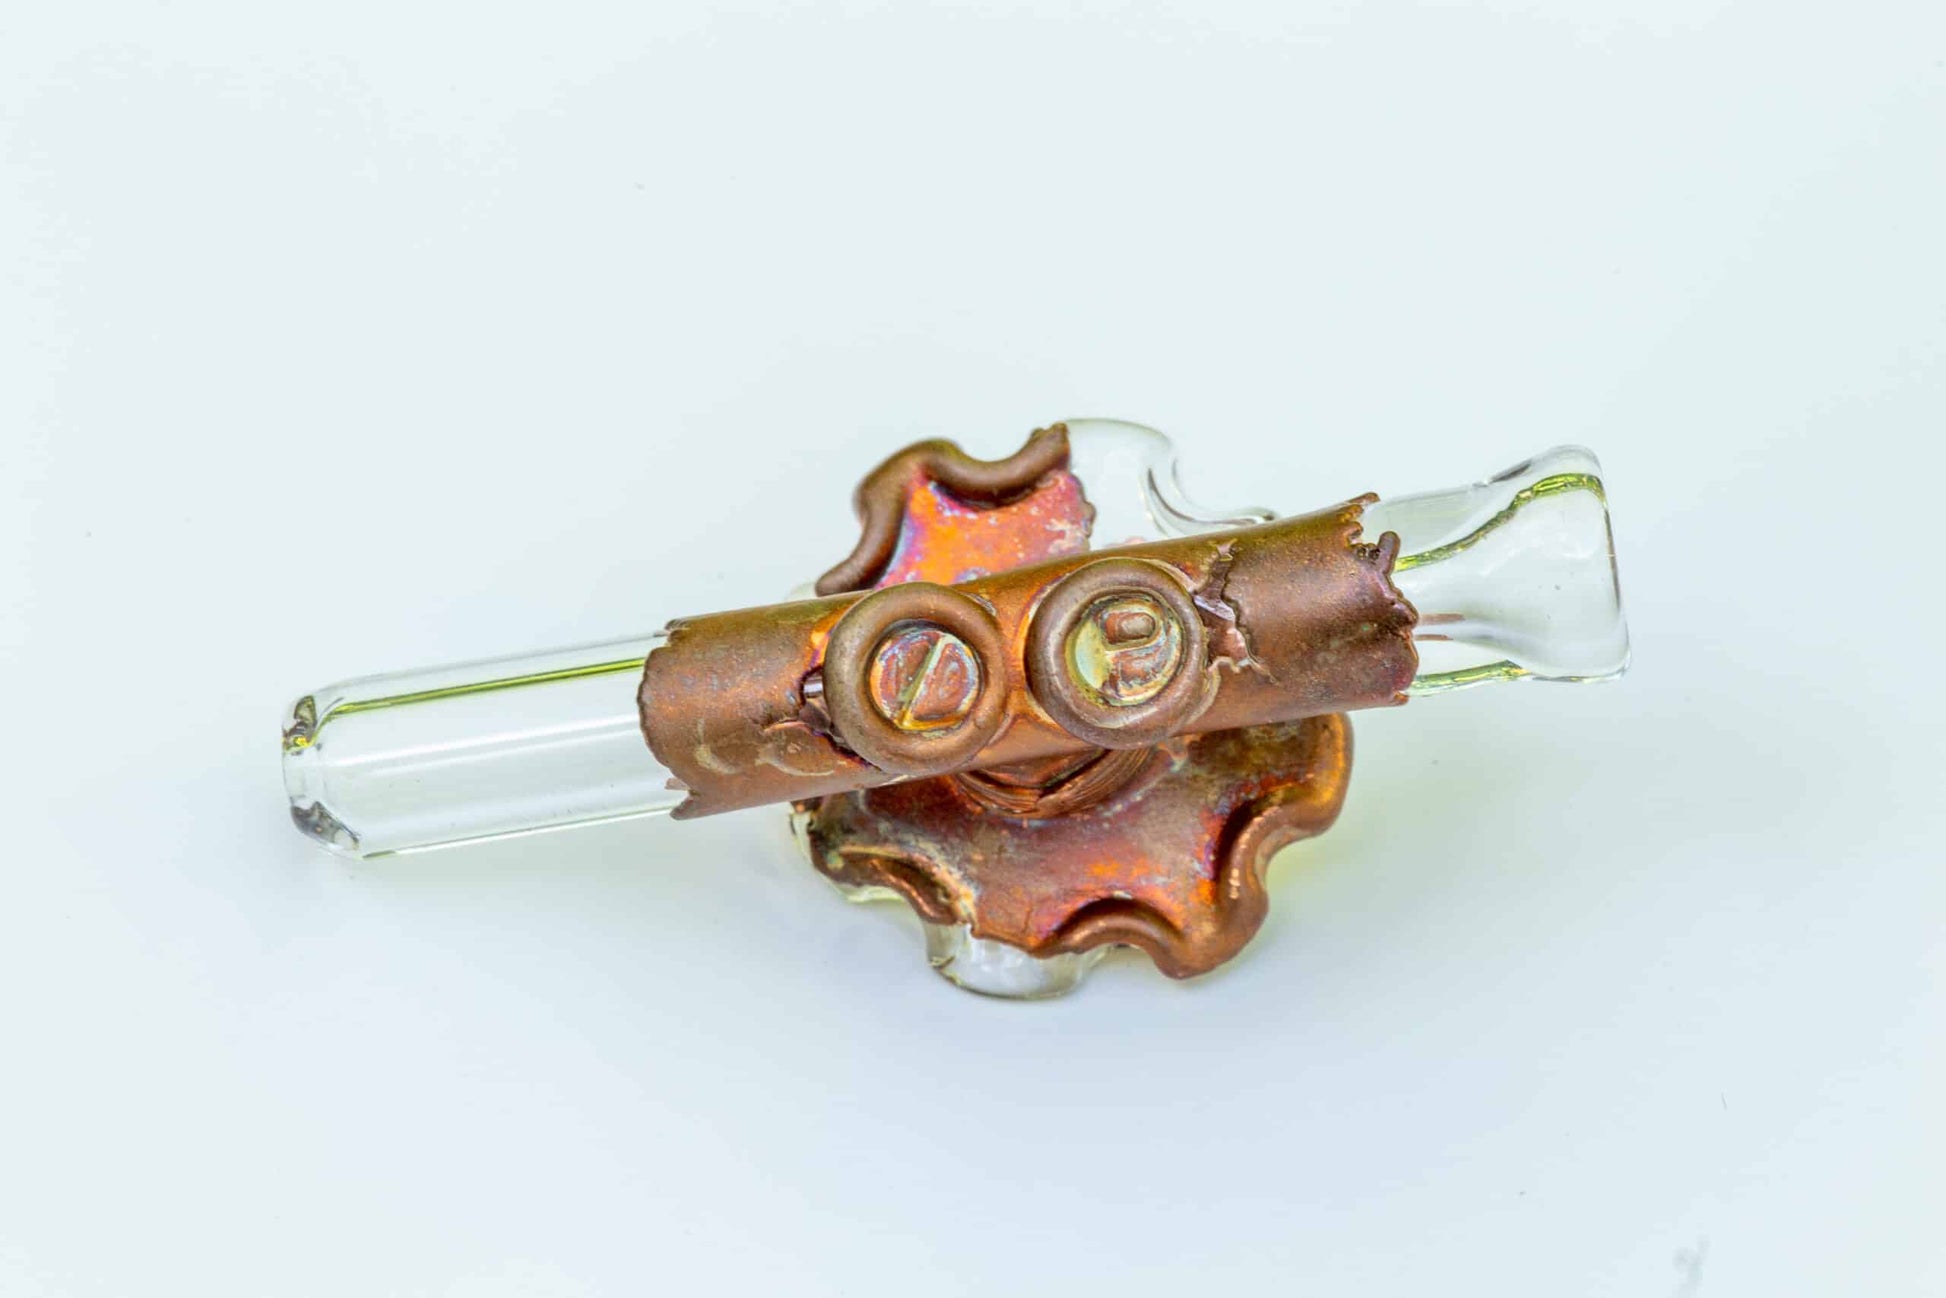 meticulously crafted art piece - Copper/Glass Onie by Snic Barnes x Zach P